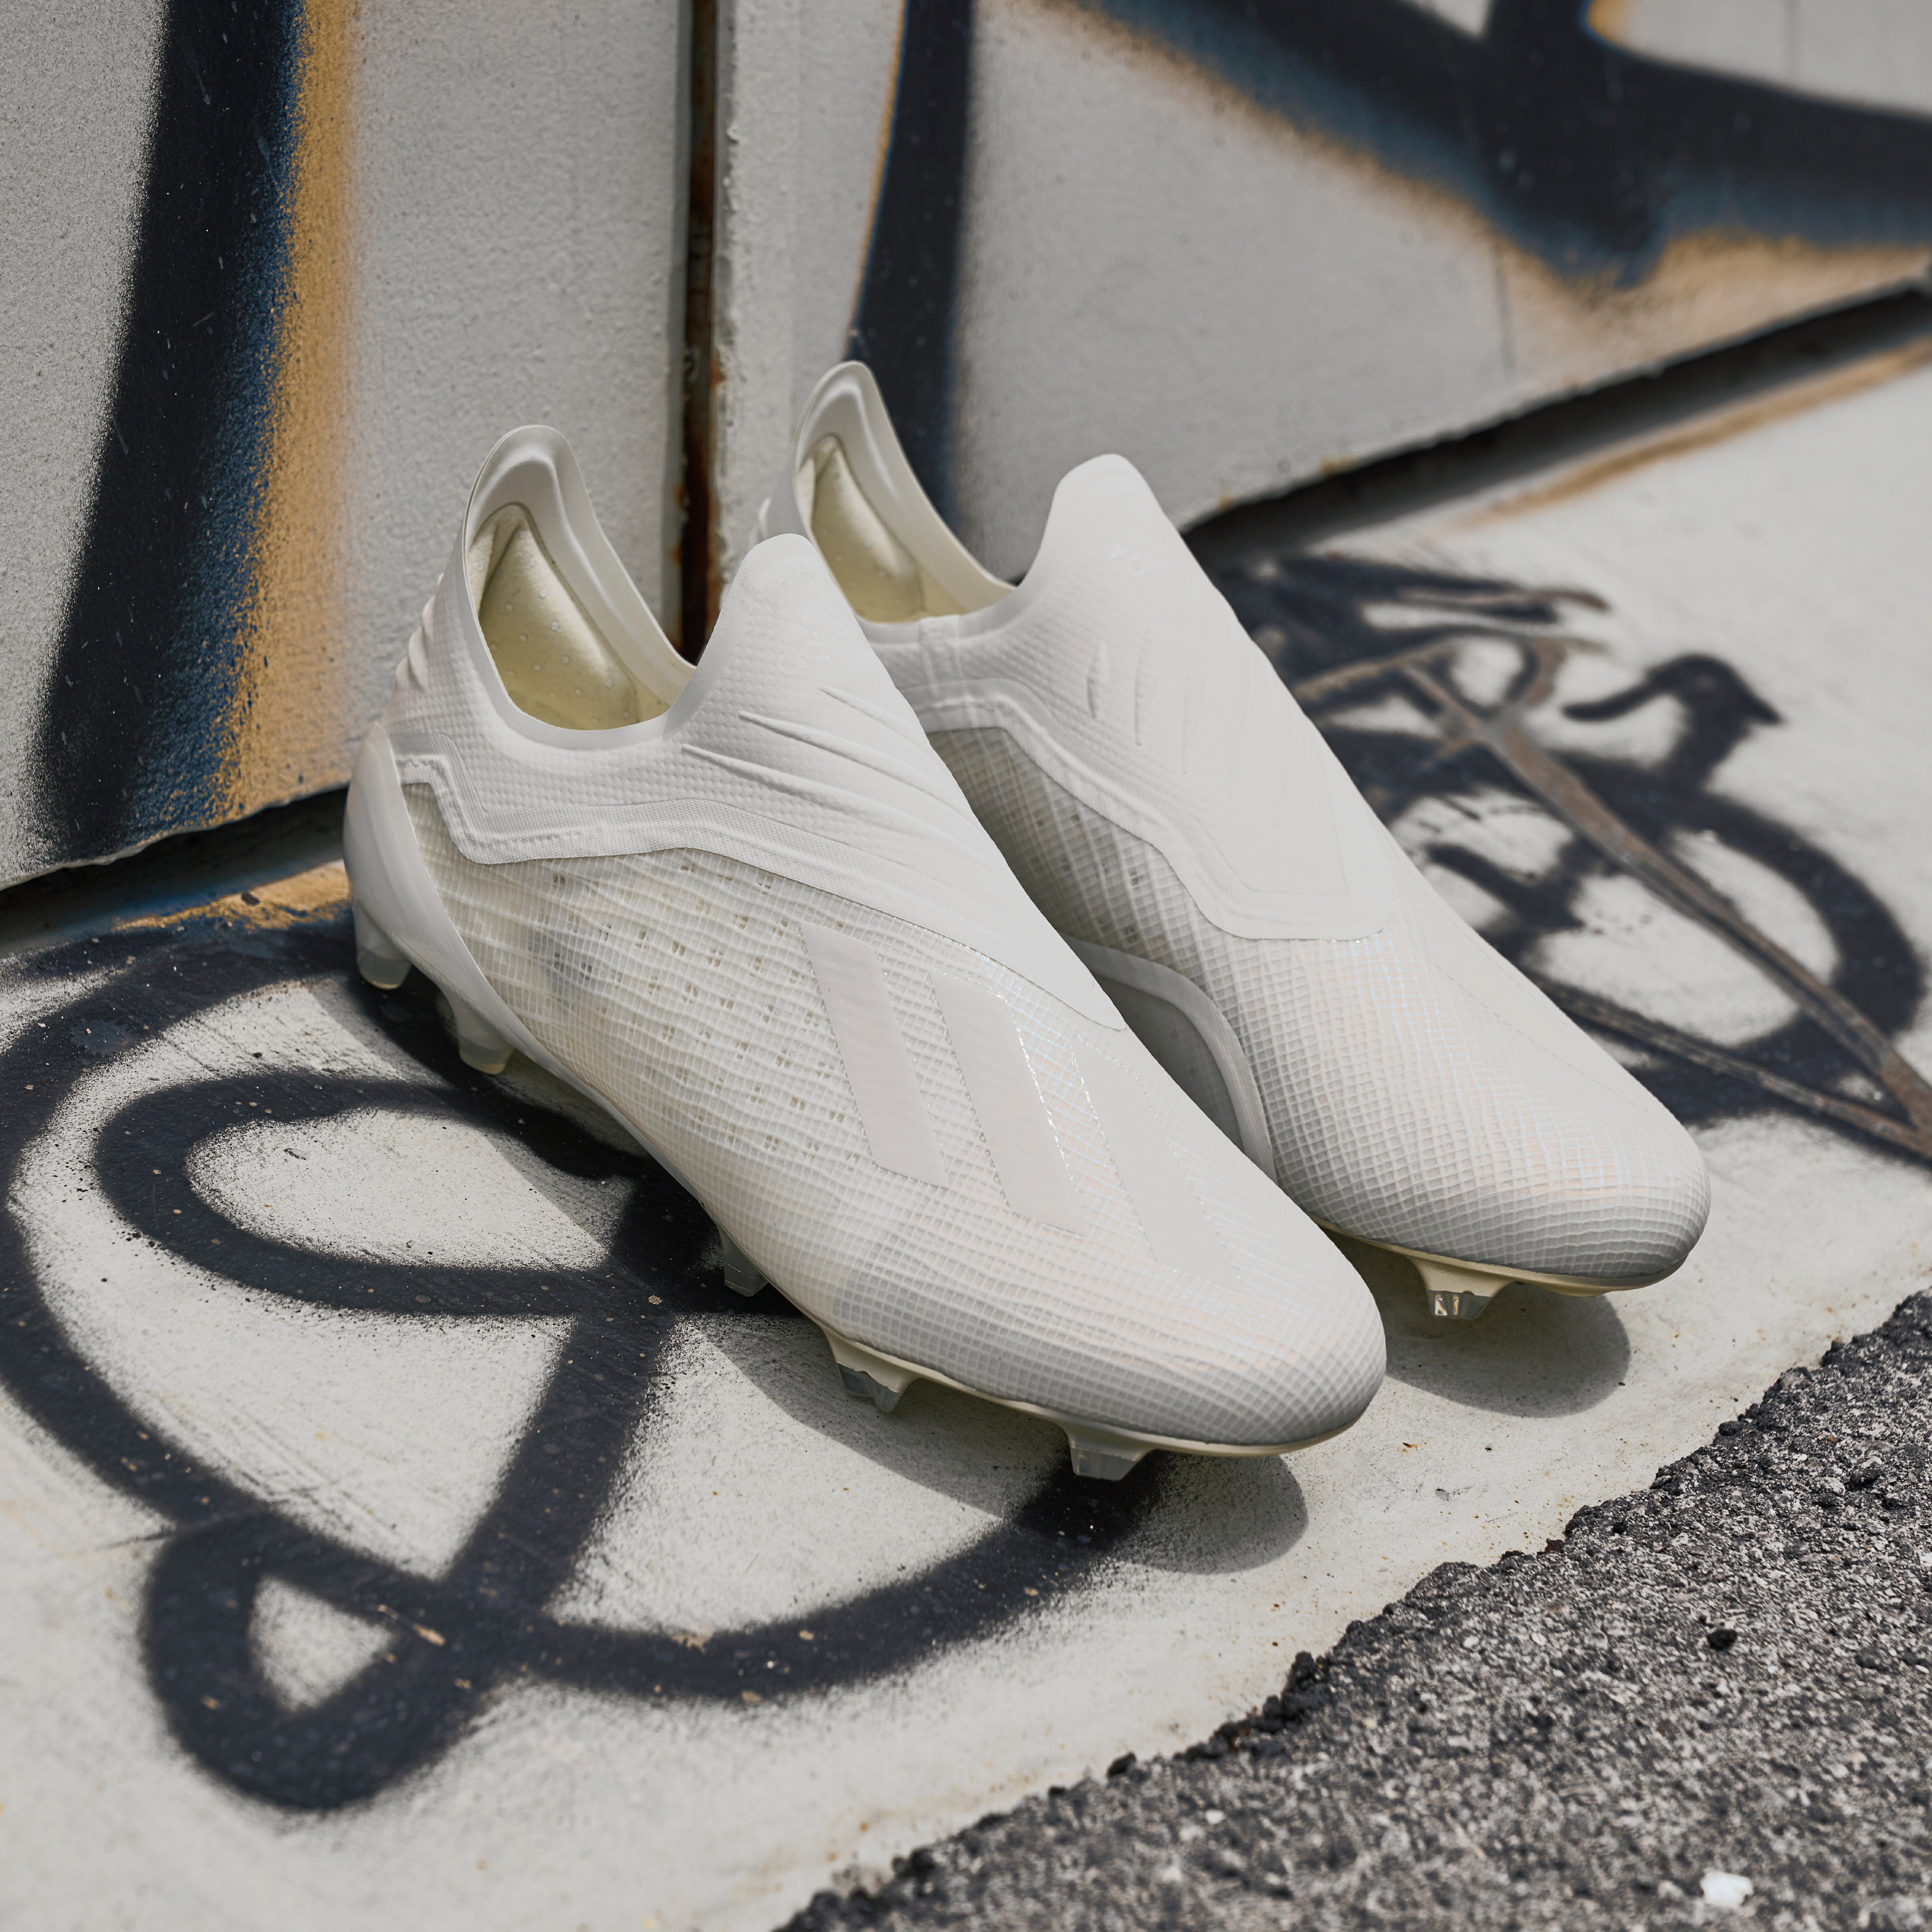 Propiedad letal Comunismo Pro:Direct Soccer on Twitter: "Clean as you like. The new X18+ from the adidas  Spectral Mode. 🕊️ https://t.co/TWCLTWMqS4" / Twitter